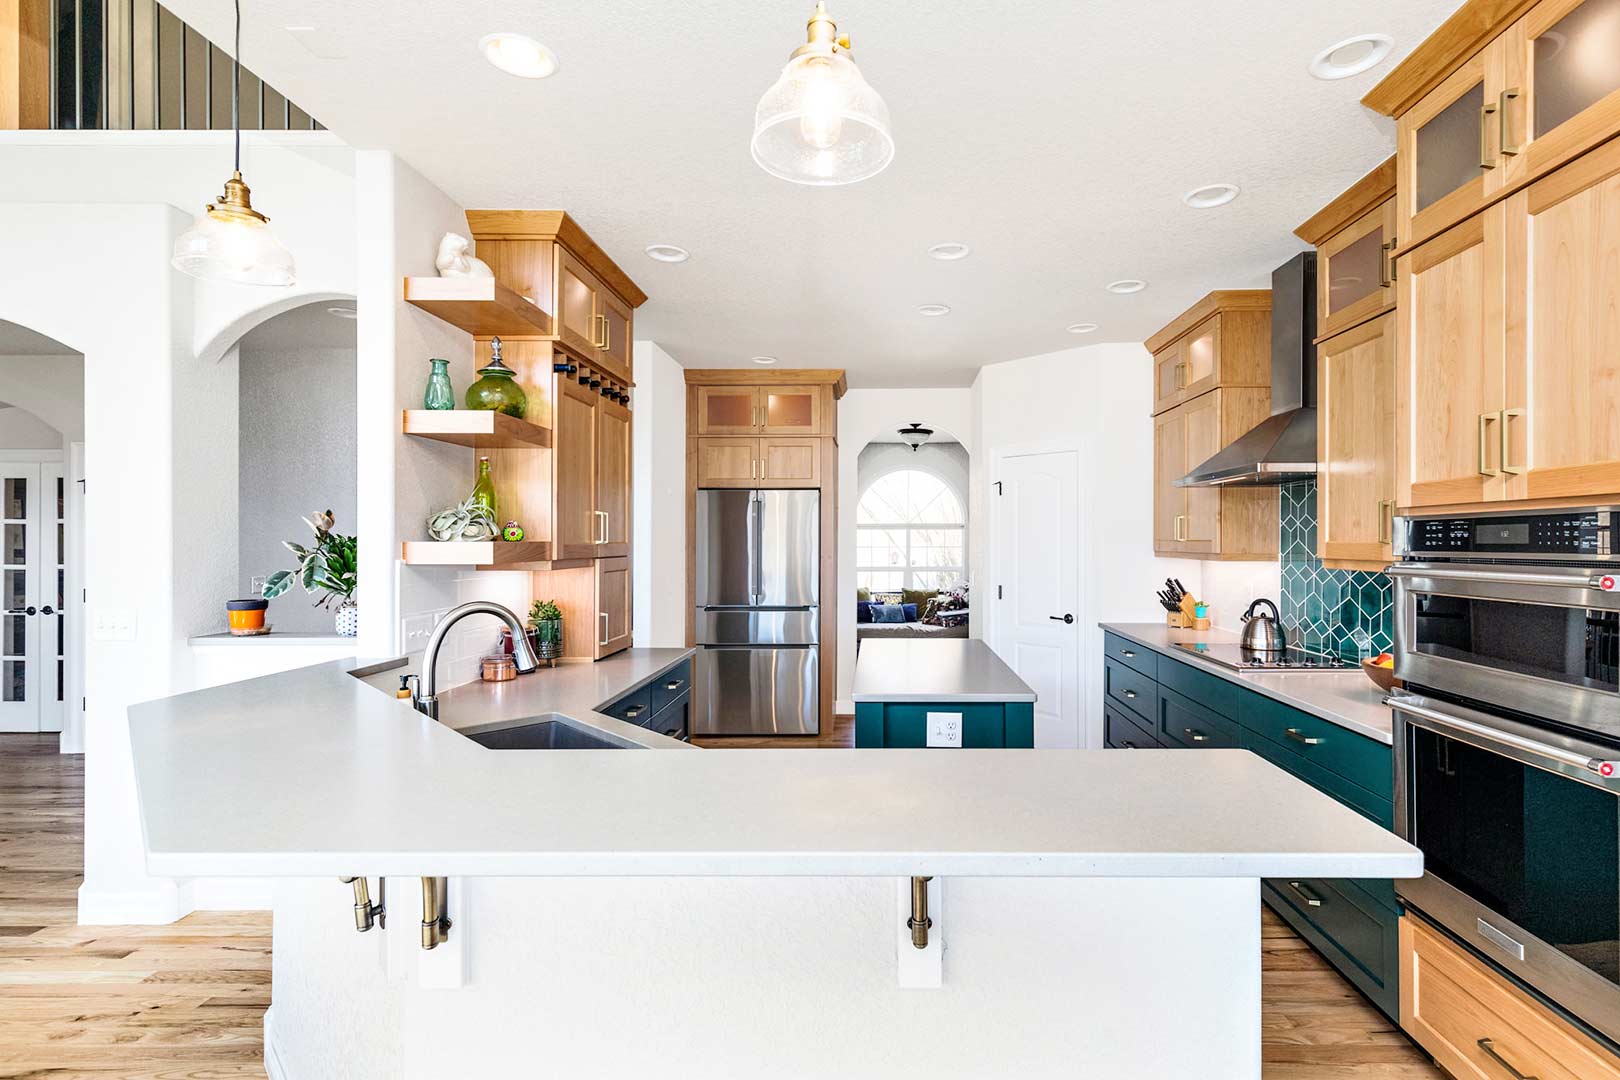 A bright and airy modern kitchen design by Freestone Design-Build in Fort Collins Colorado